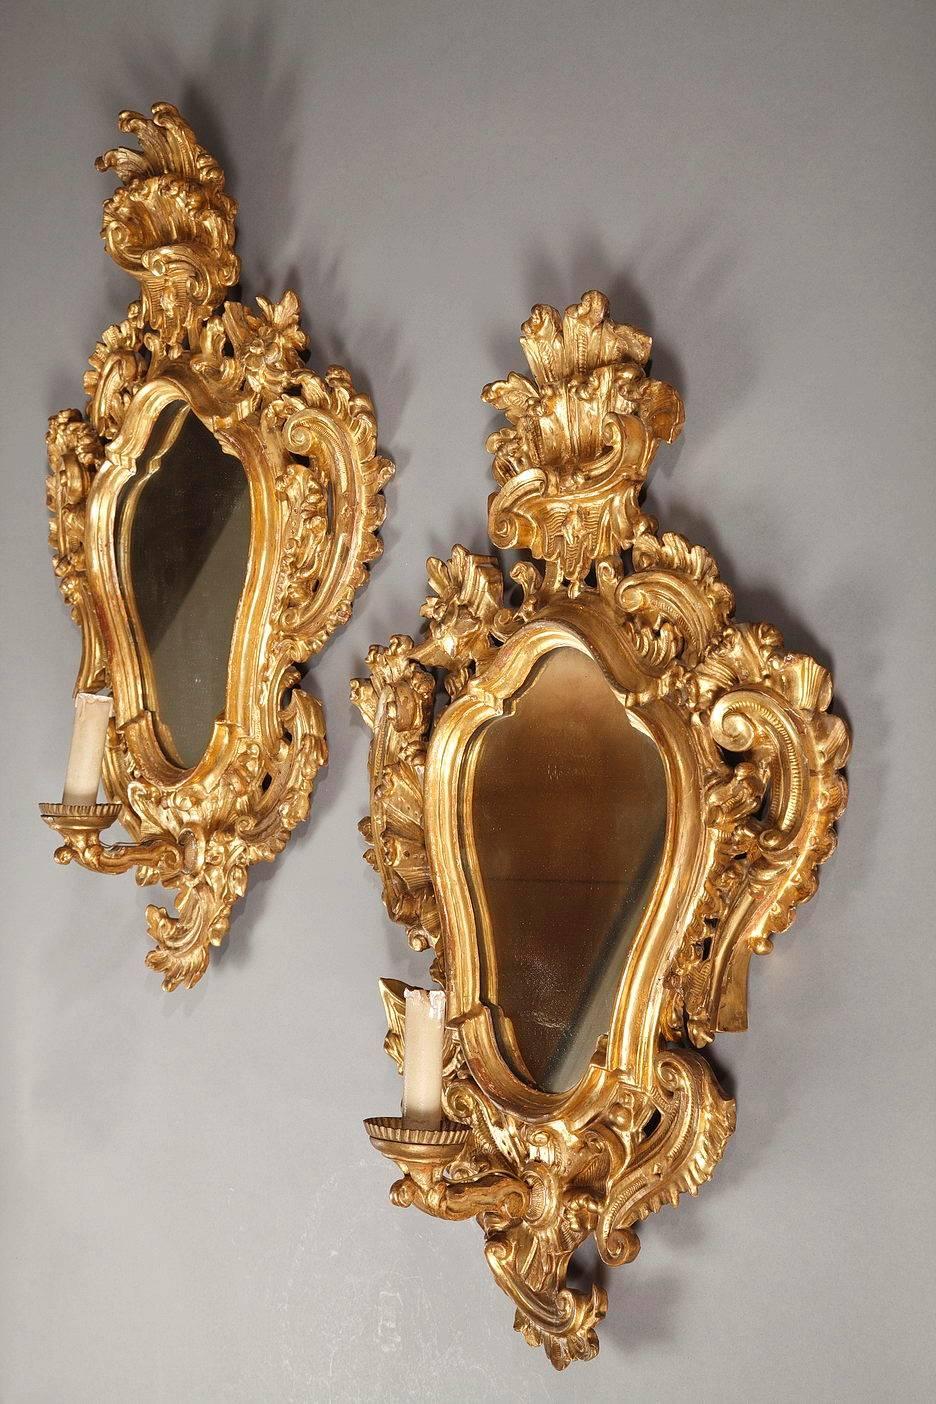 Pair of Italian mirrors in giltwood, richly decorated with openwork scrolling, foliage and flowers. At the bottom of each mirror is a candle arm embellished with fluting,

circa 1750.

Dim: W: 20.9 in – D: 6.7in – H: 29.5in.
Dim: L: 53cm, P: